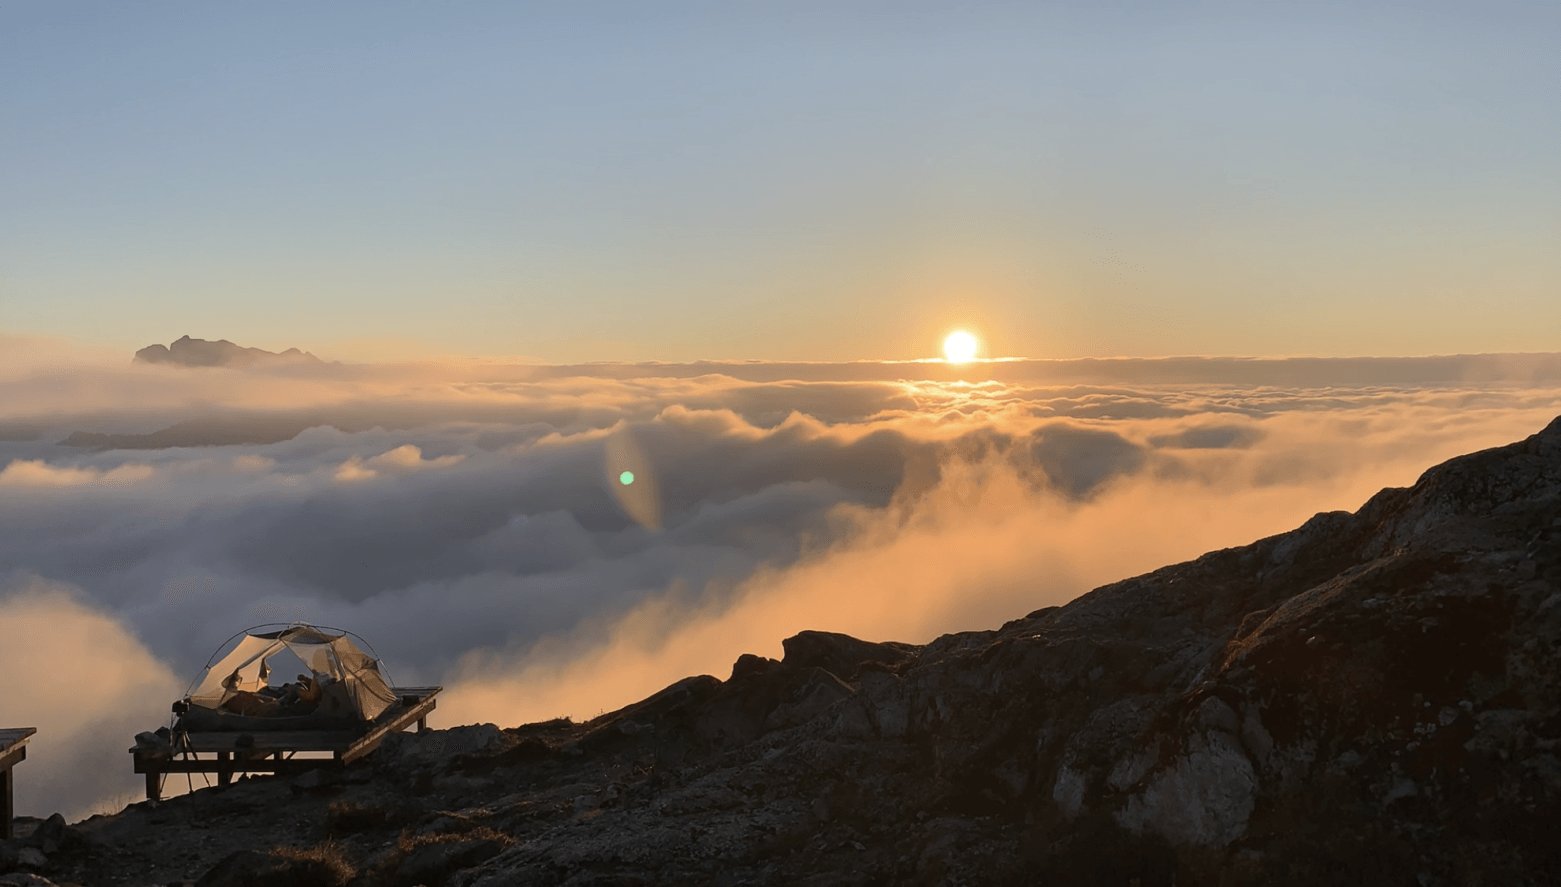 Sunrise, a tent and cloud inversion on the Panorama Ridge at Golden Ears mountain, BC, Canada